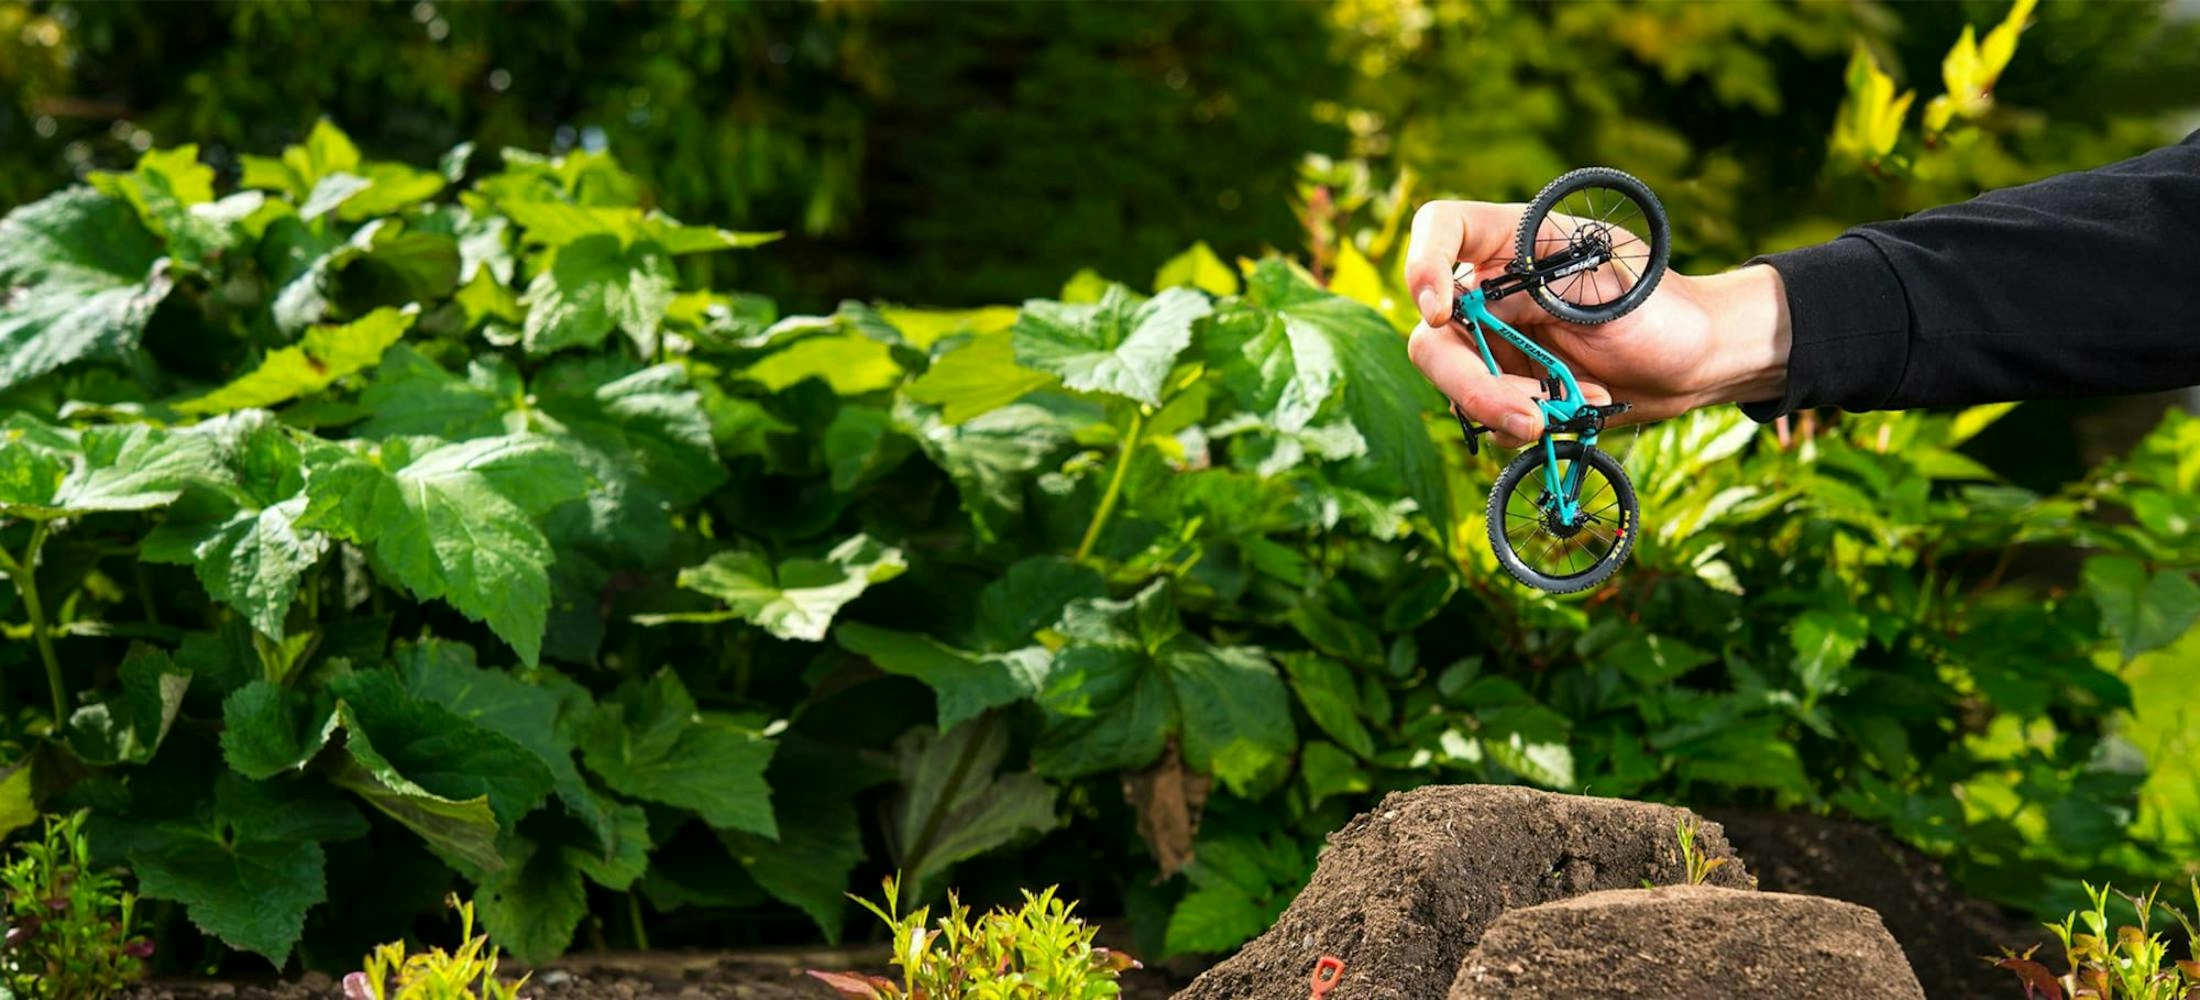 The 5010 finger-bike being jumped off of tiny dirt jumps